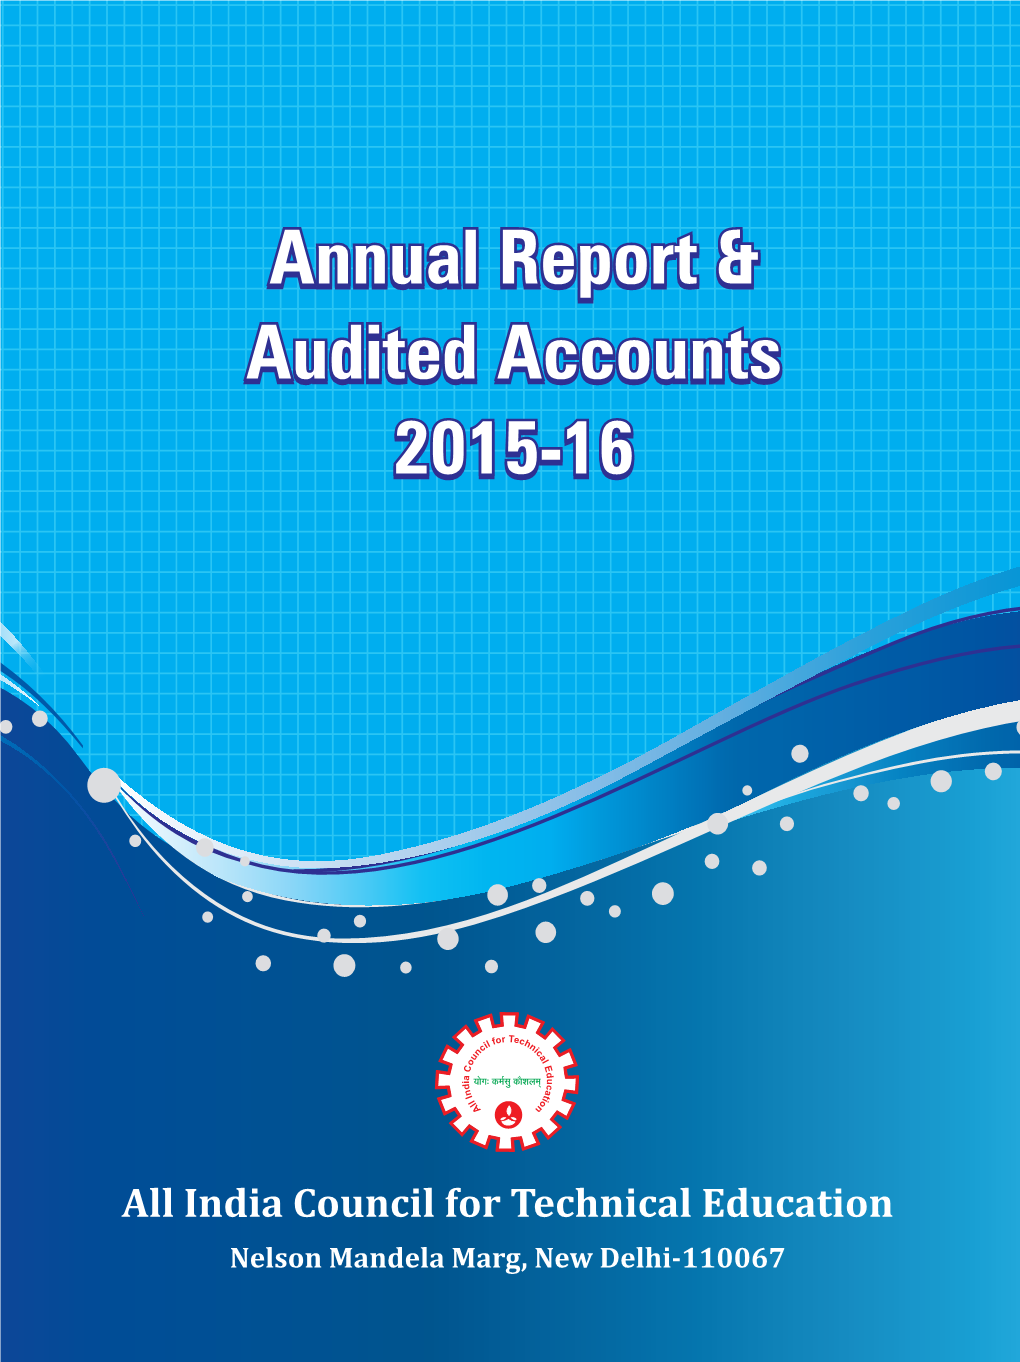 Annual Report & Audited Accounts 2015-16